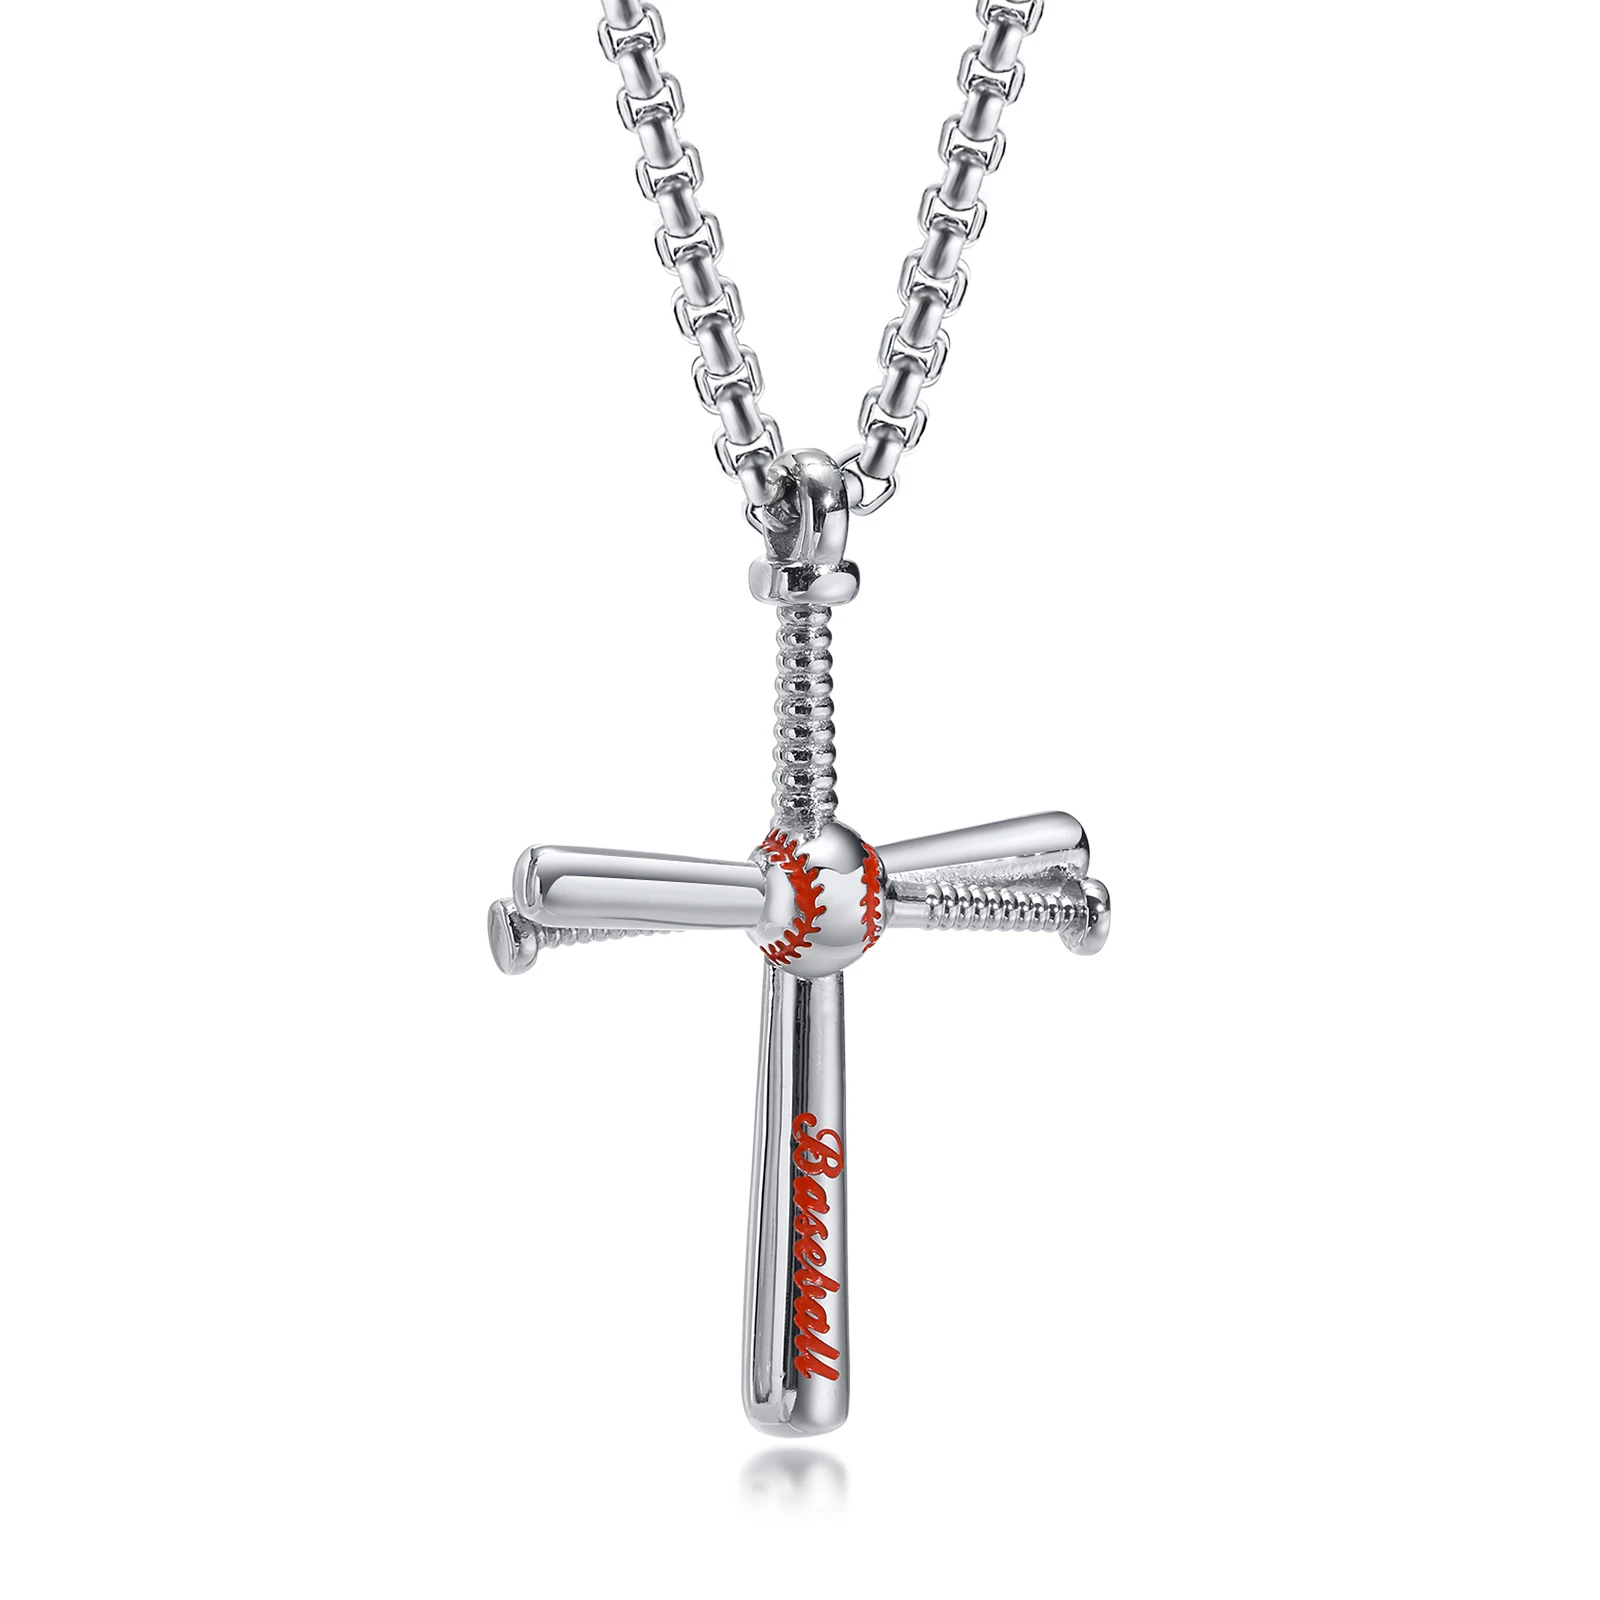 Gold Black Enameled Gripped Baseball Bat Cross Necklace | All In Faith |  Reviews on Judge.me